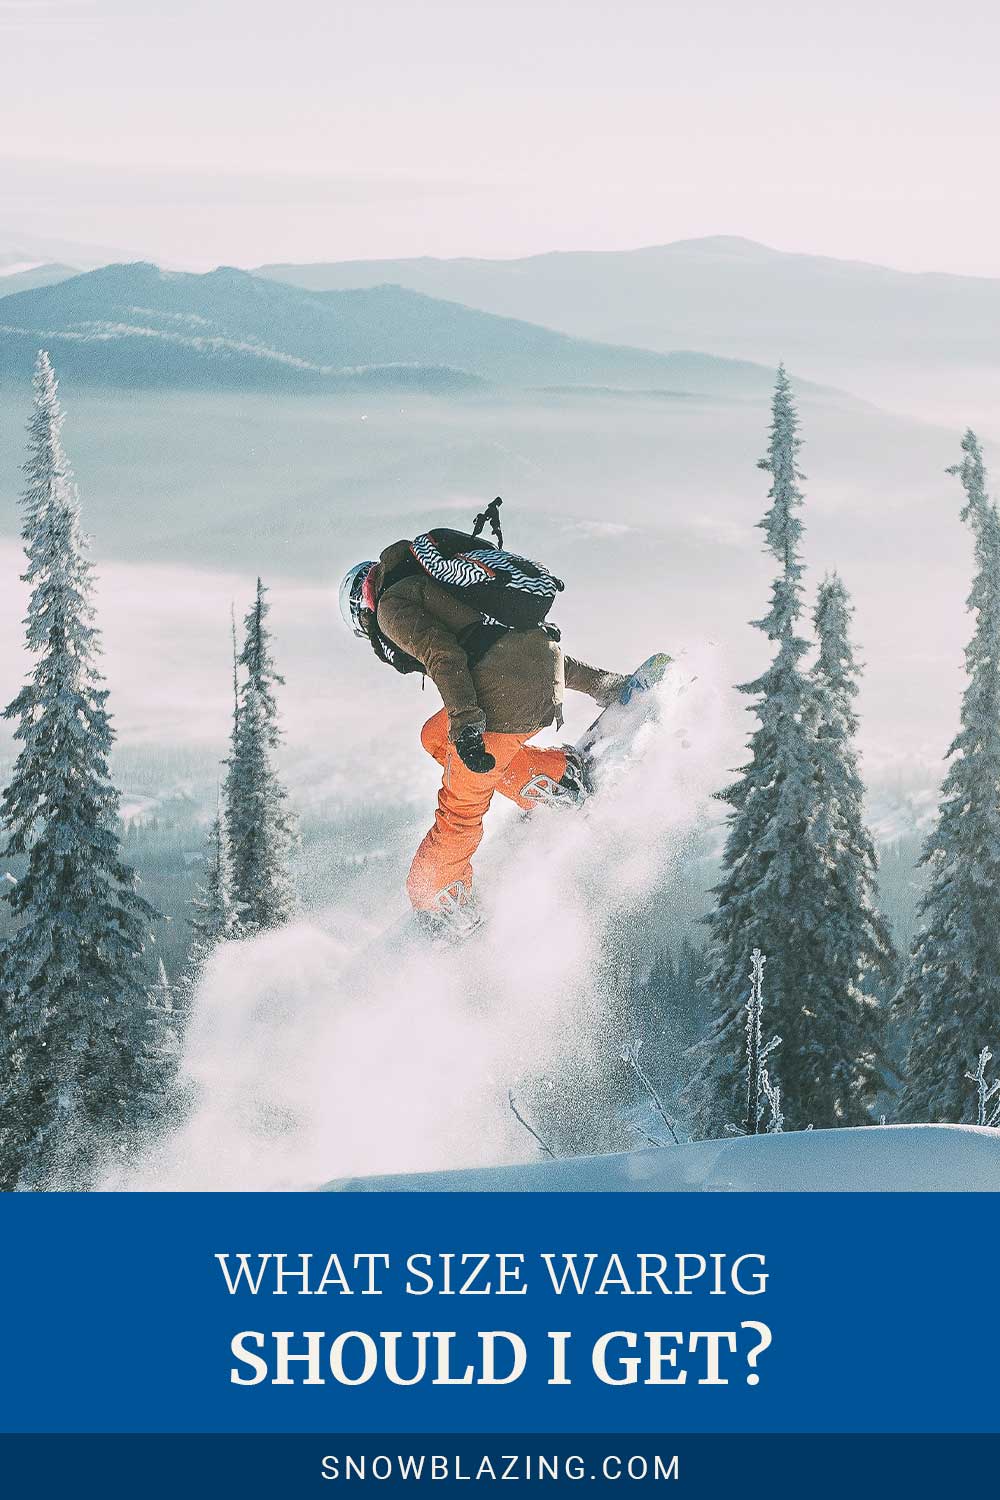 Person snowboarding wearing brown jacket and orange pants with a backpack - What Size Warpig Should I Get?